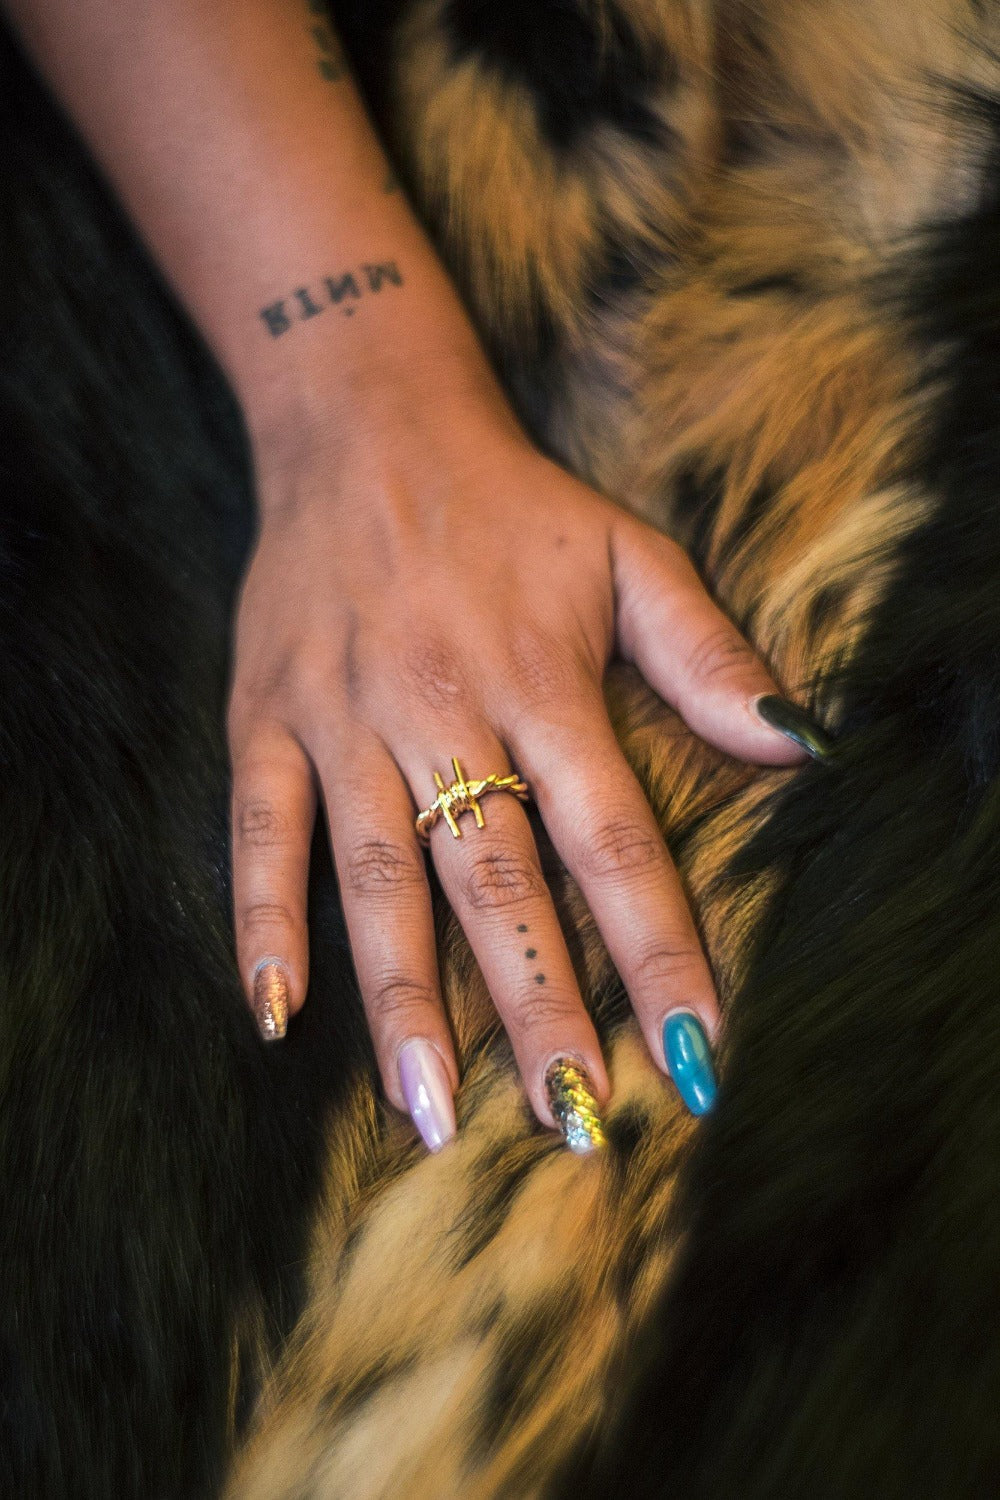 The Kabul House Essential Barb Wire Ring - Blingistan, hand with tattoos wearing gold barbwire ring, on fur backdrop.